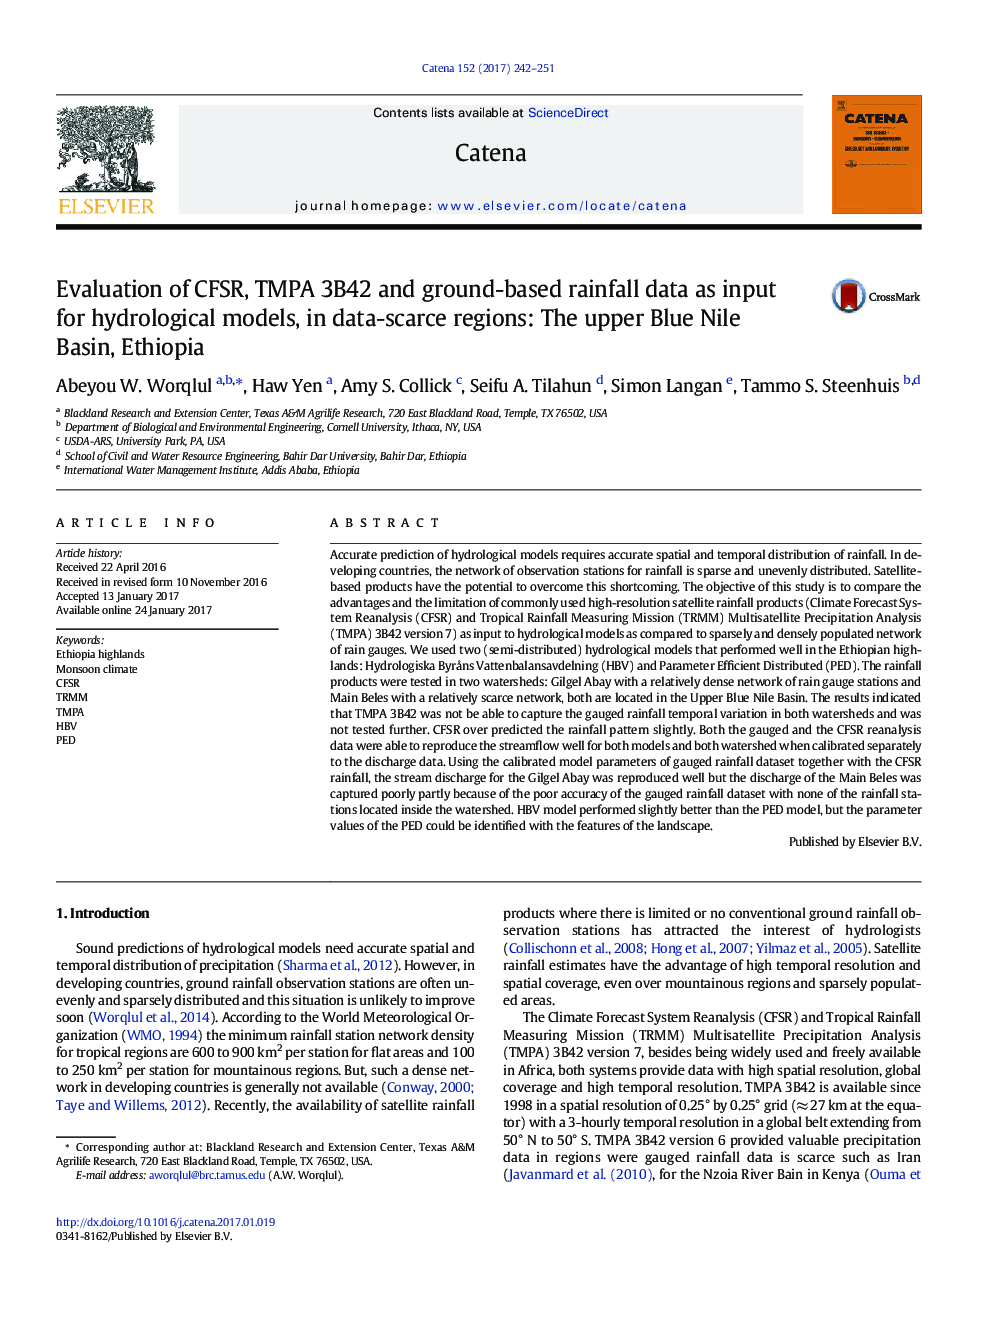 Evaluation of CFSR, TMPA 3B42 and ground-based rainfall data as input for hydrological models, in data-scarce regions: The upper Blue Nile Basin, Ethiopia